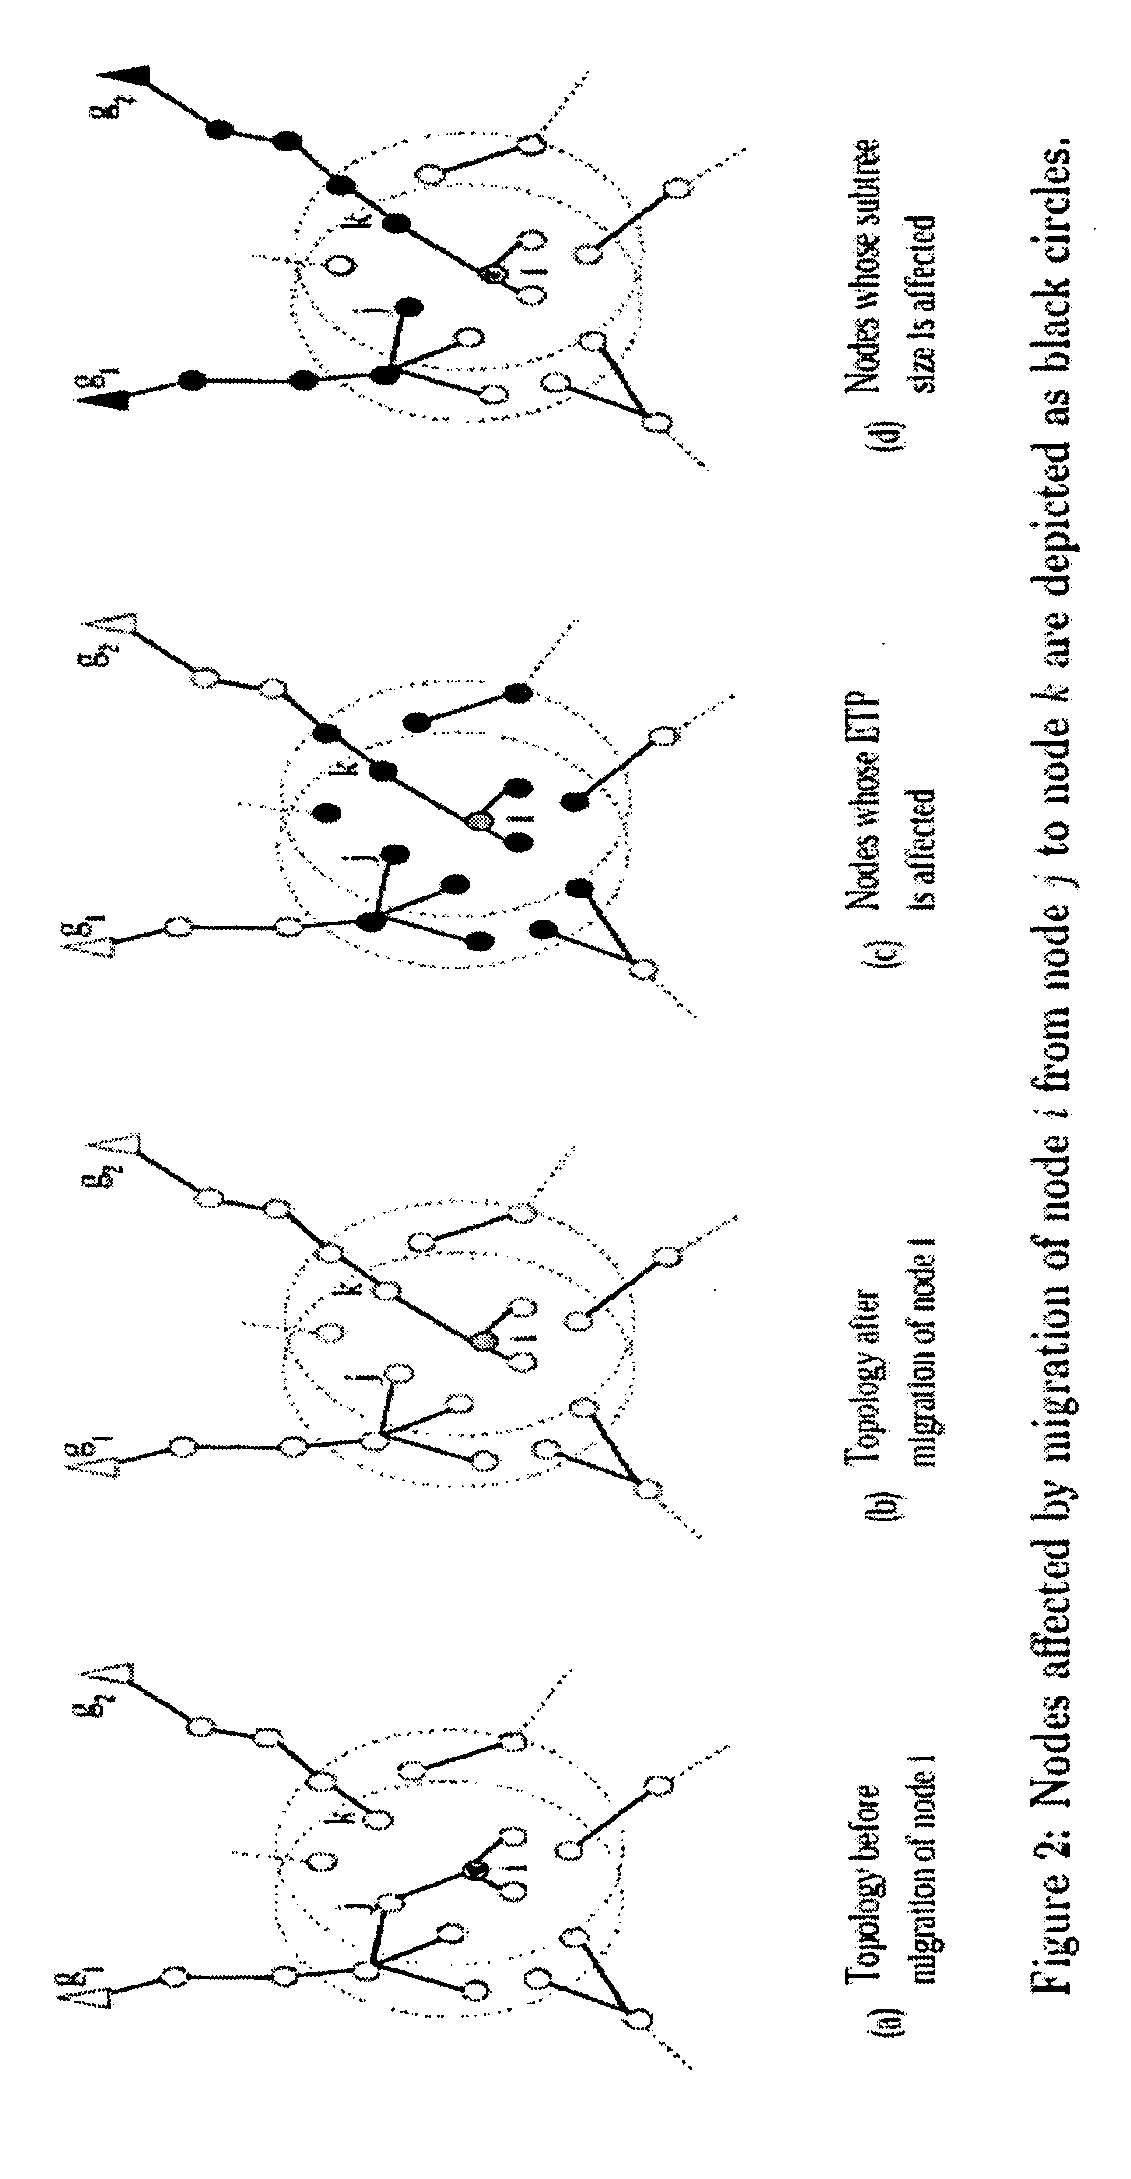 Method for routing and load balancing in communication networks